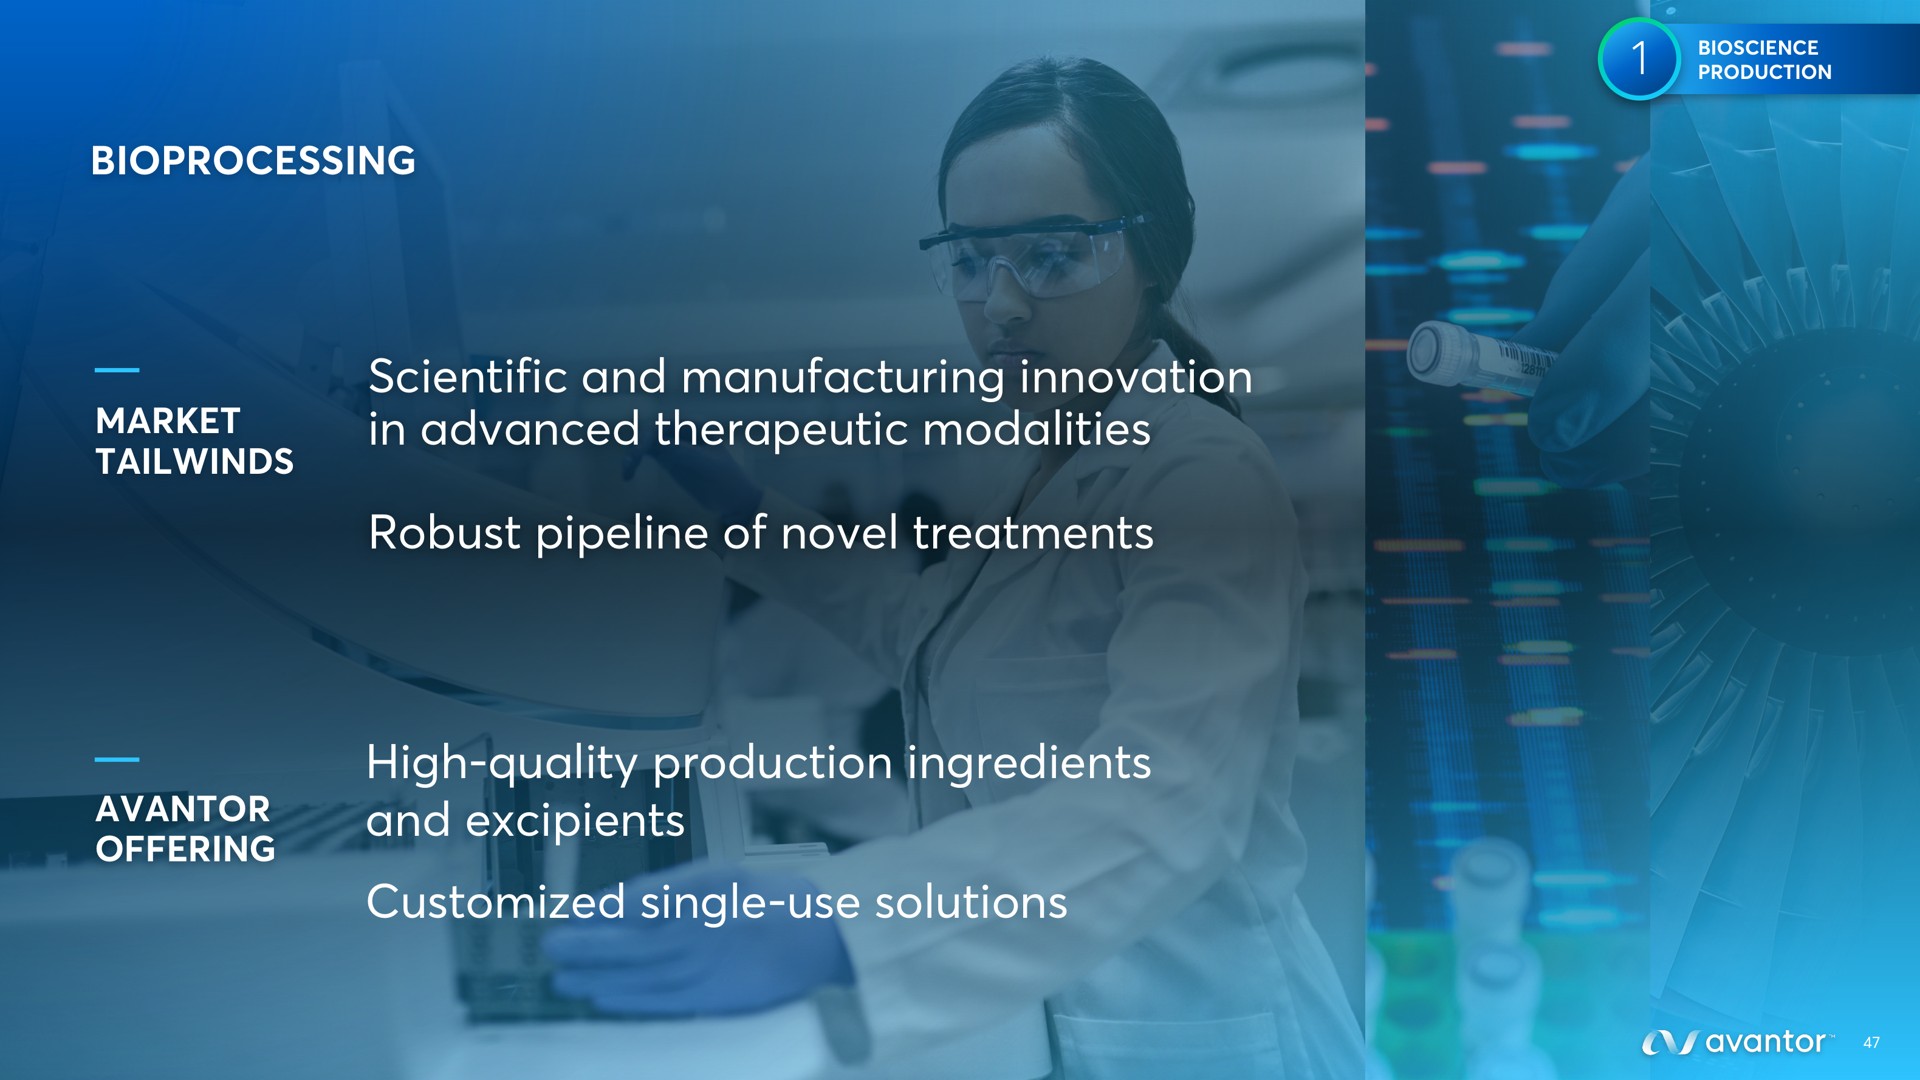 scientific and manufacturing innovation in advanced therapeutic modalities robust pipeline of novel treatments high quality production ingredients and single use solutions | Avantor